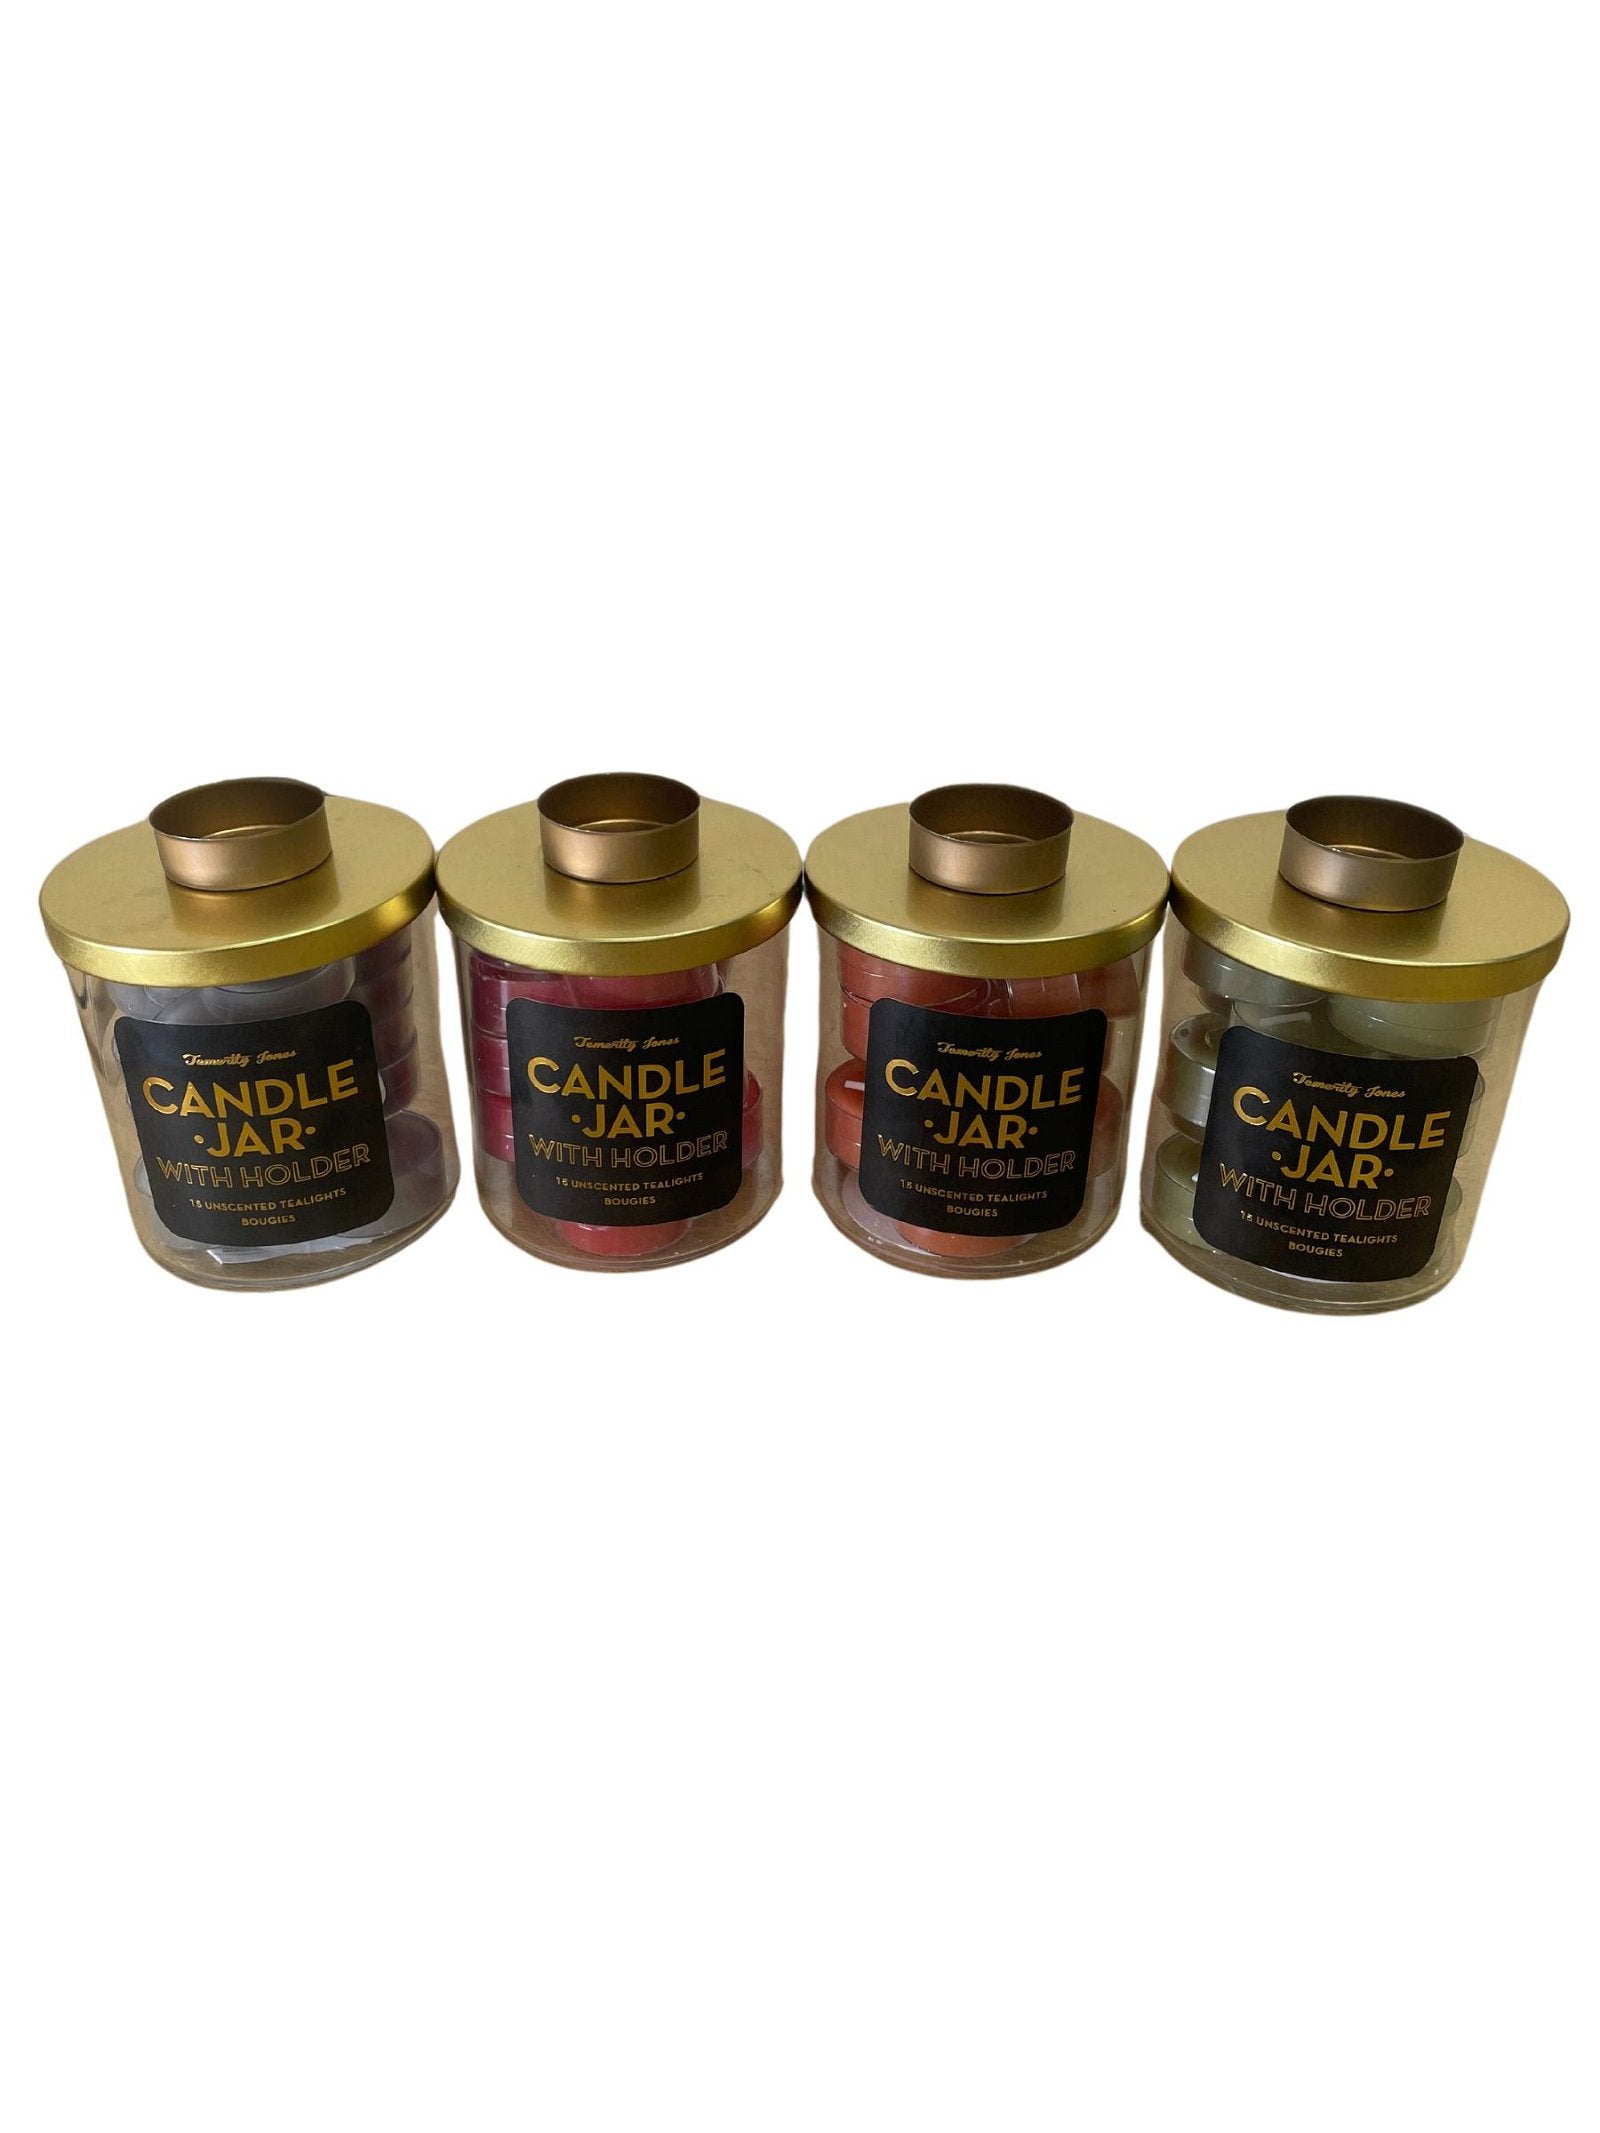 View Multi Coloured Scented Tea Light Candles Pack of 4 information